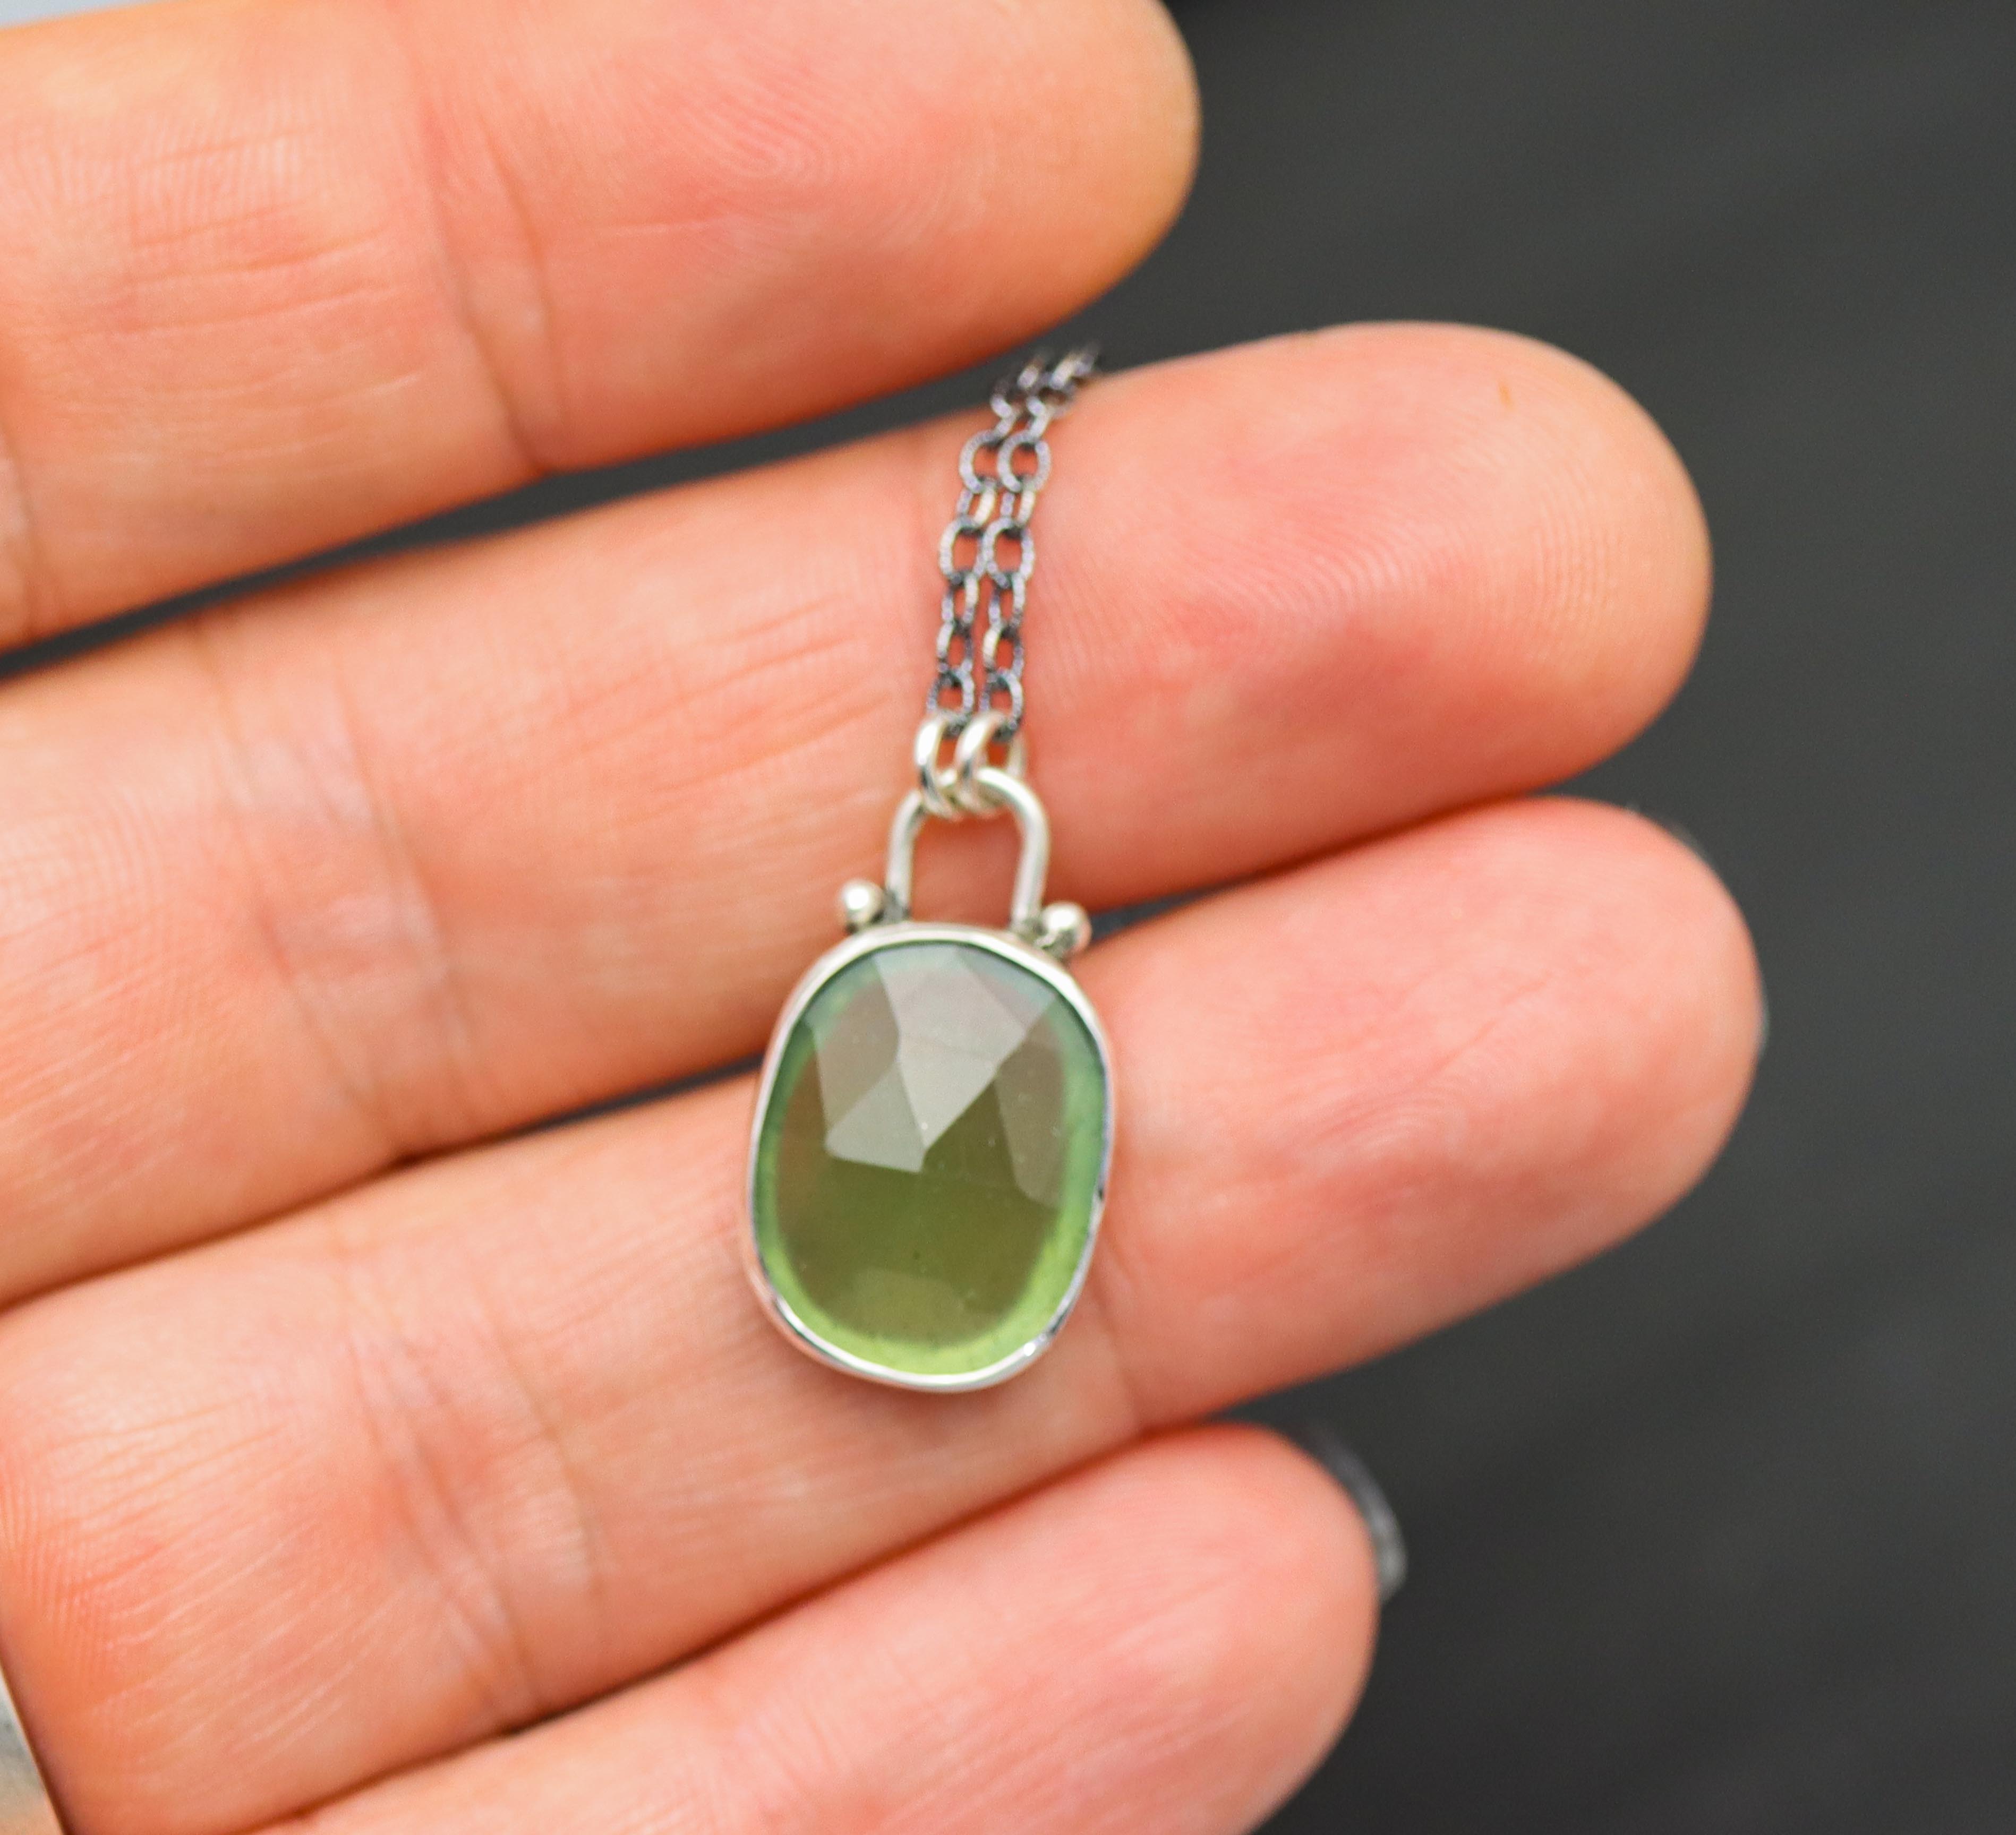 Green Serpentine Pendant Necklace Sterling Silver